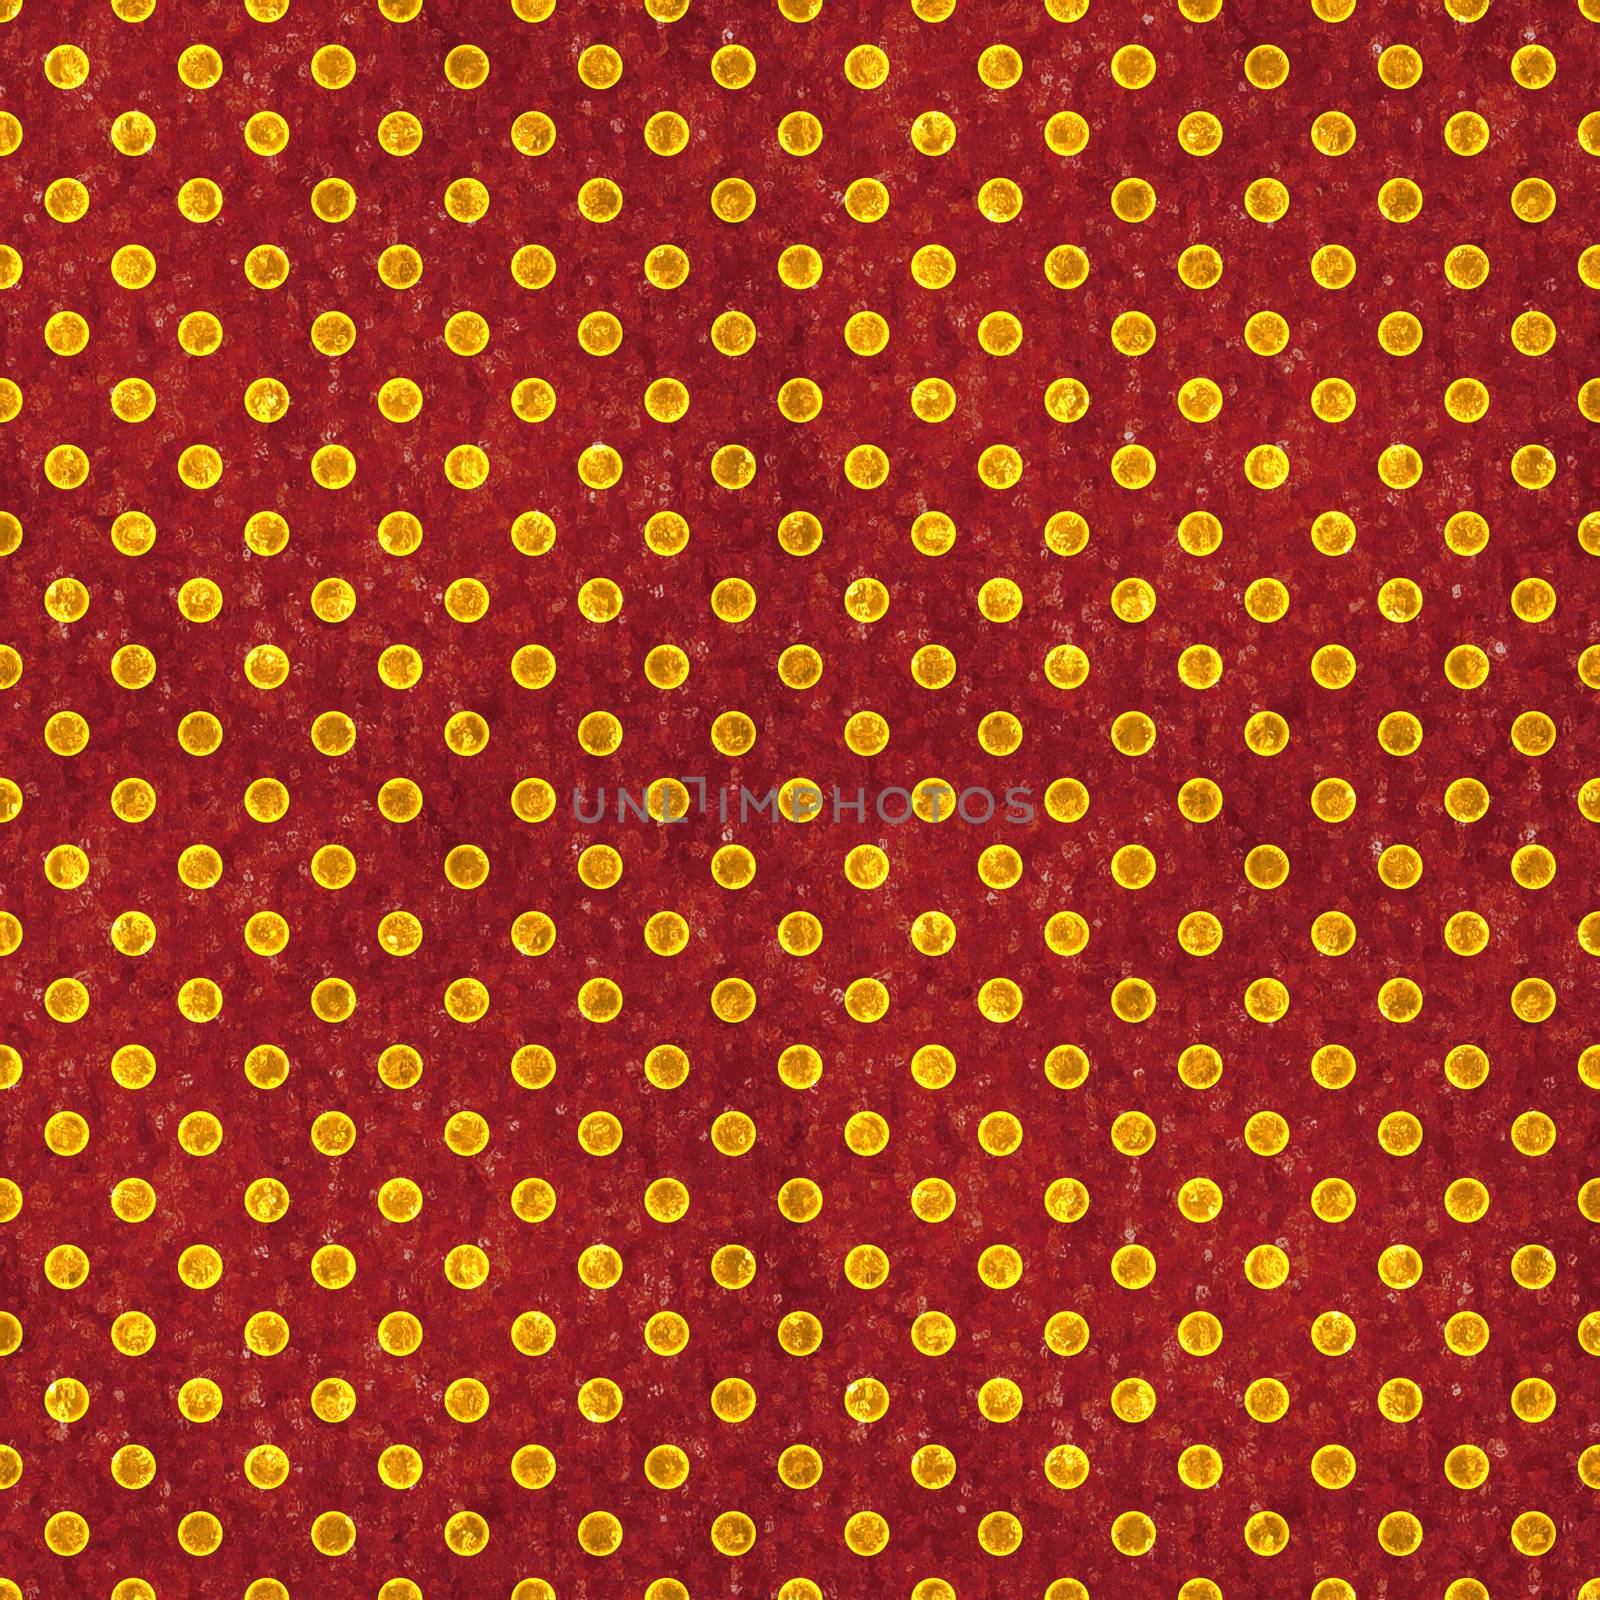 Seamless Red & Gold Polka Dot by SongPixels